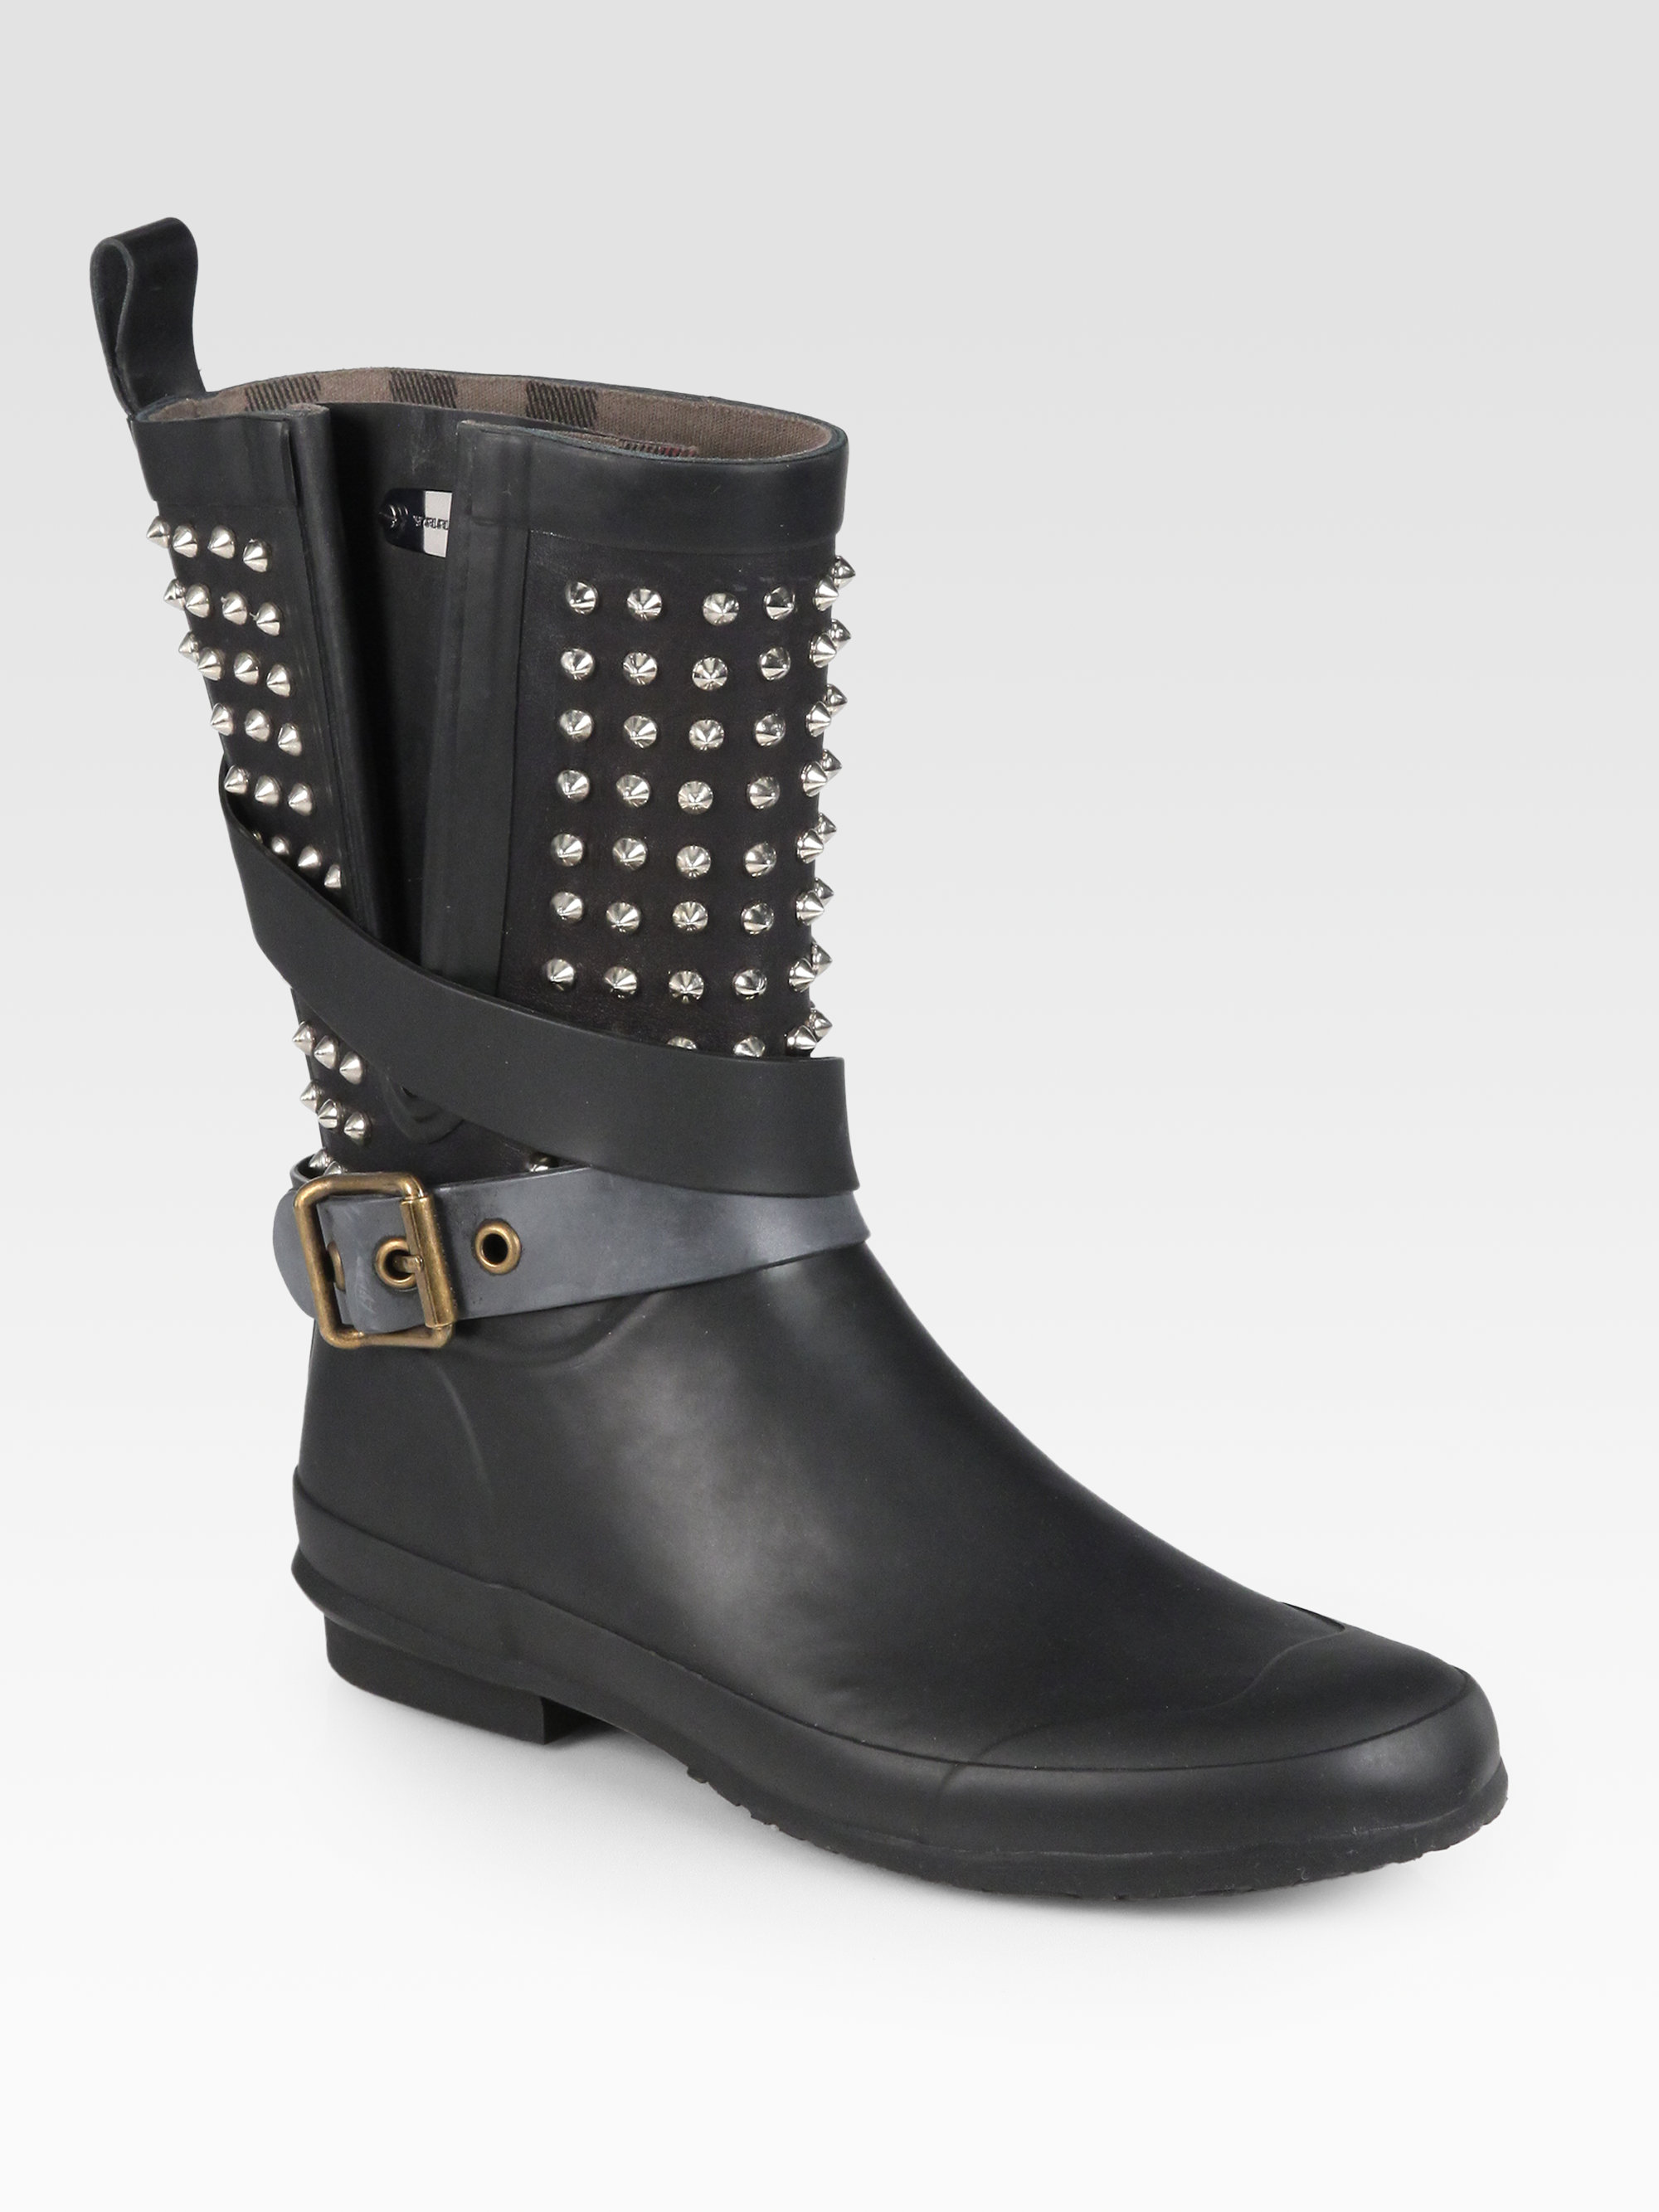 burberry holloway rain boots review